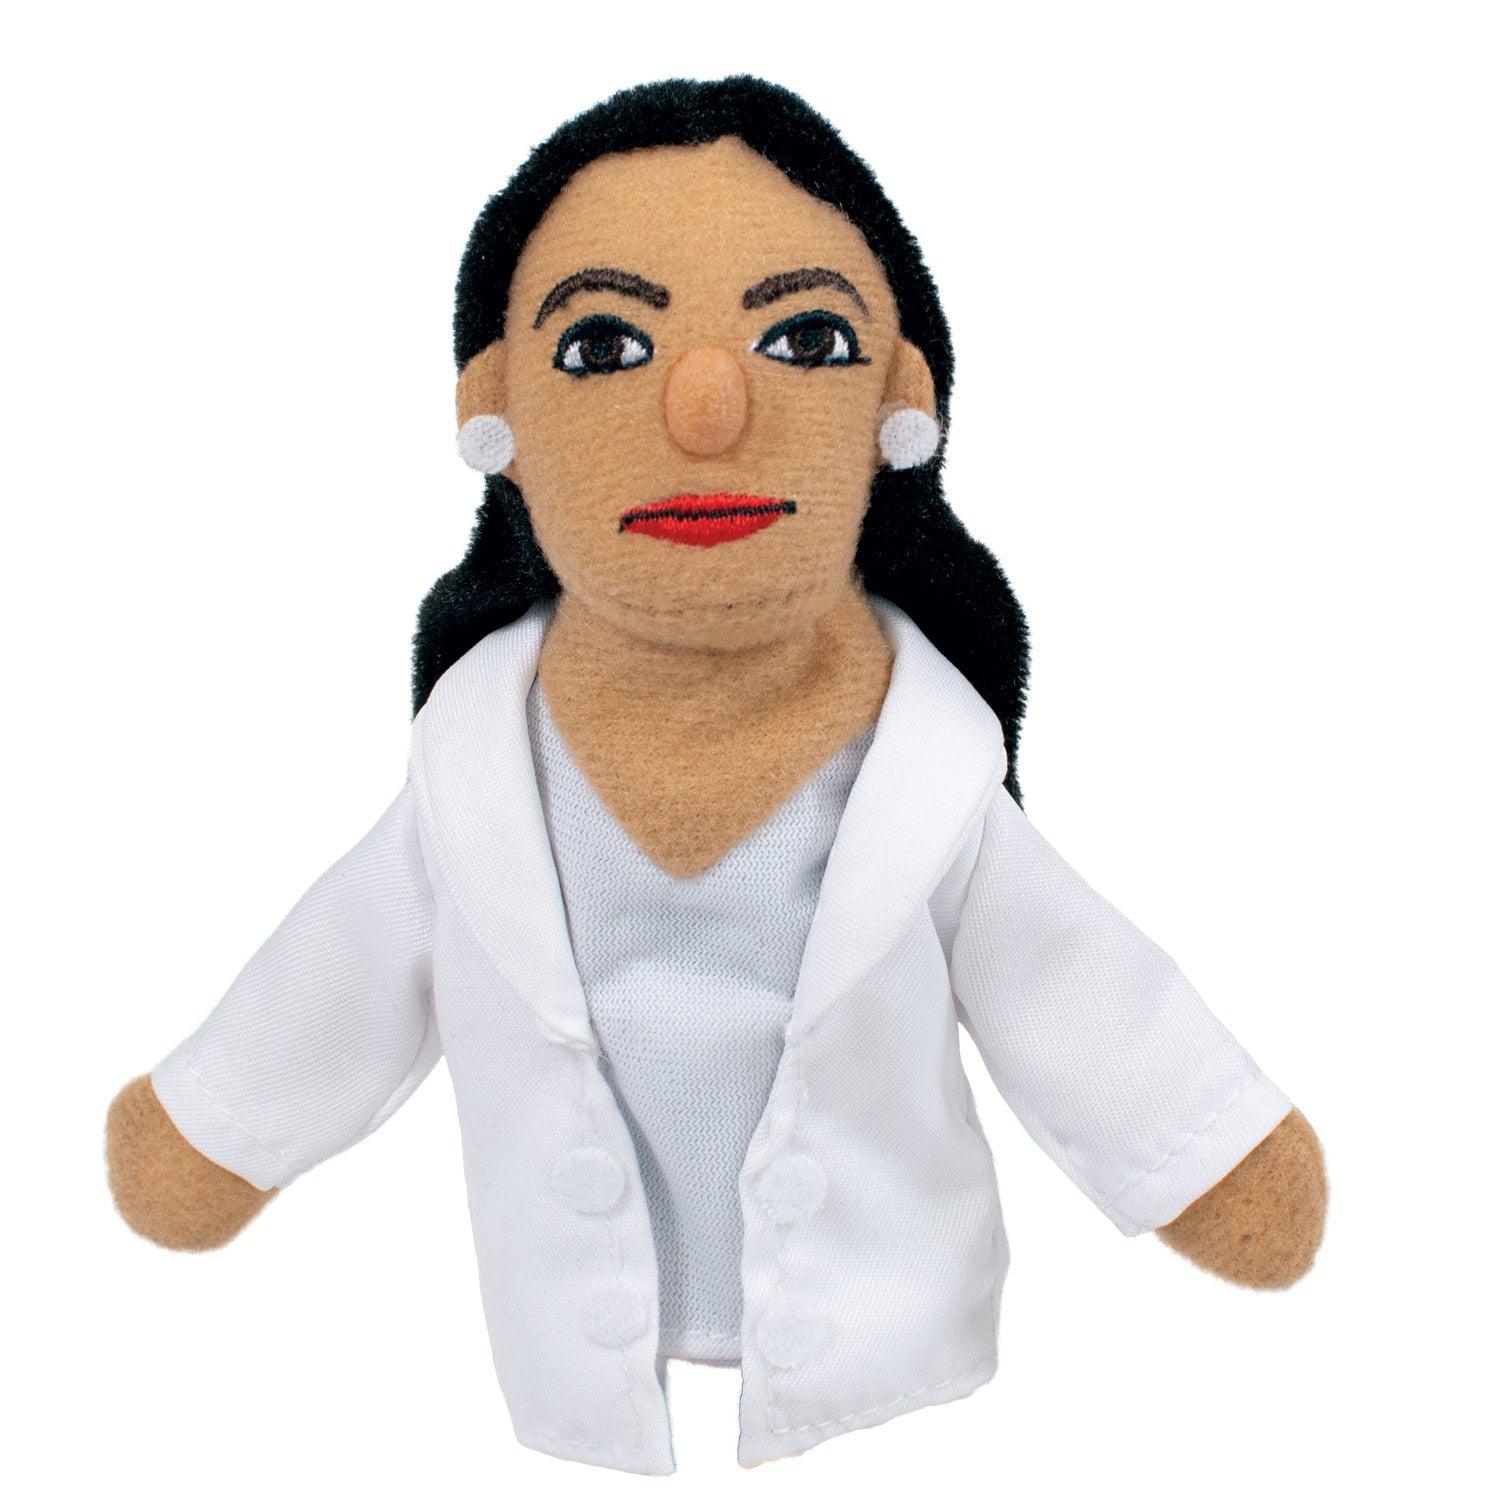 Product photo of Alexandria Ocasio Cortez Finger Puppet, a novelty gift manufactured by The Unemployed Philosophers Guild.